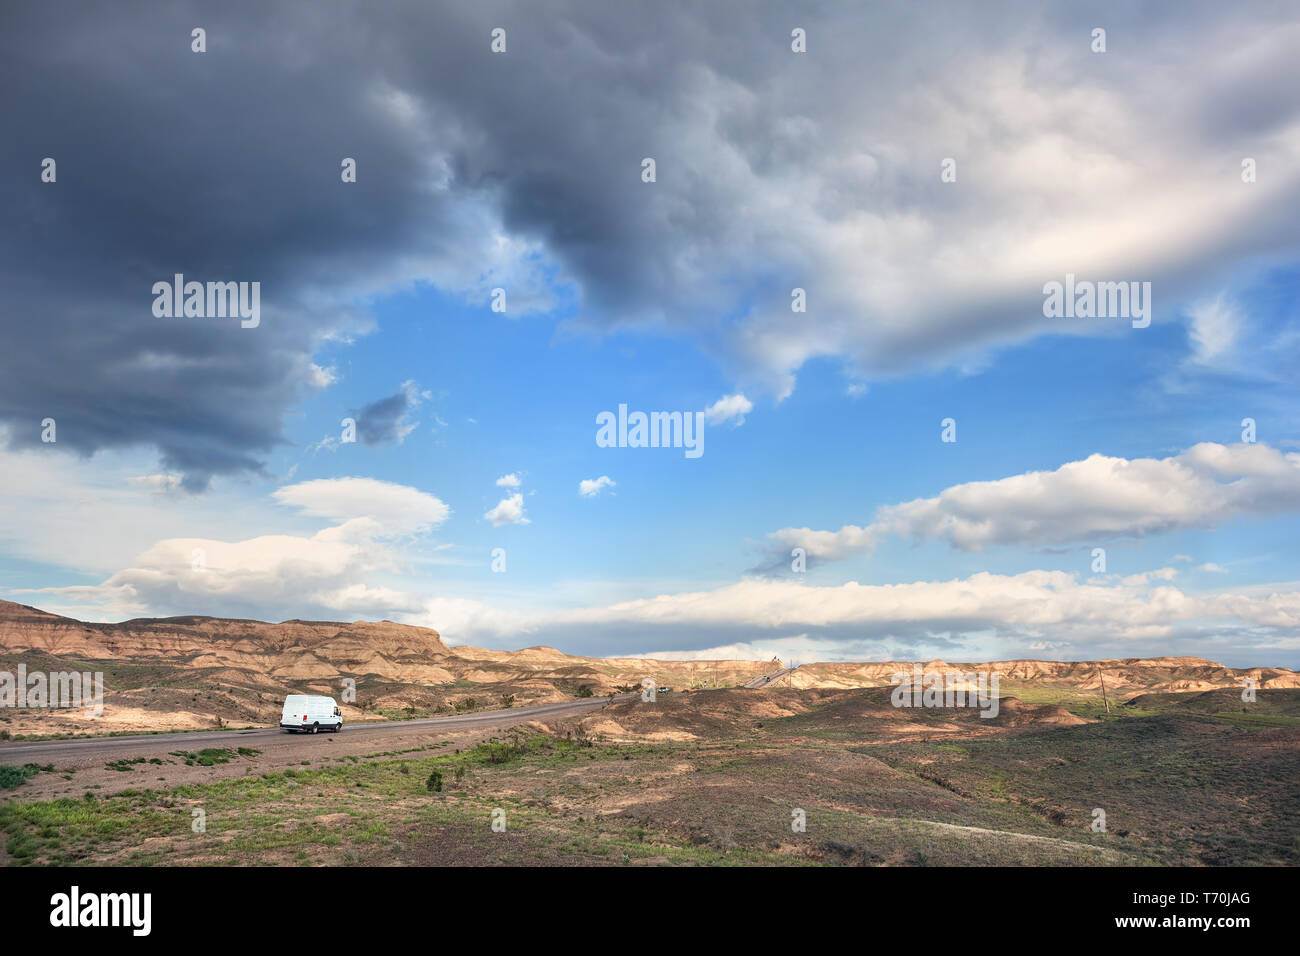 White van at highway road in the desert and cloudy blue sky Stock Photo